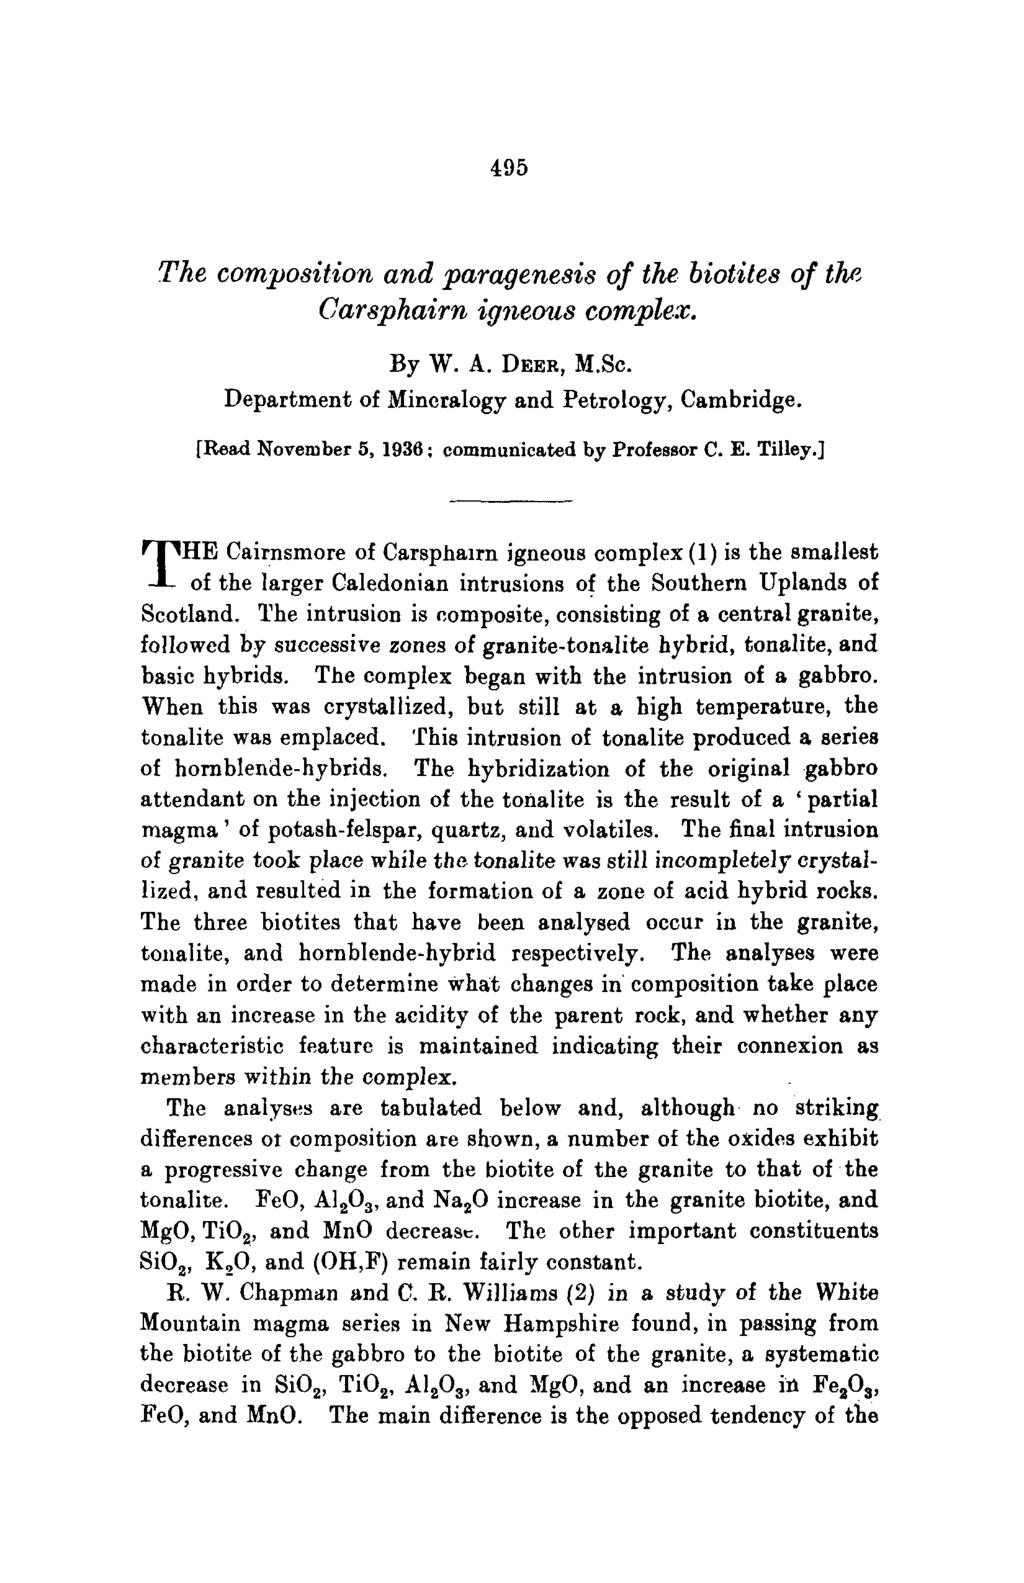 495 The composition and paragenesis of the biotites of t~ Carsphairn igneous complex. By W. A. DEER, M.Sc. Department of Mineralogy and Petrology, Cambridge.